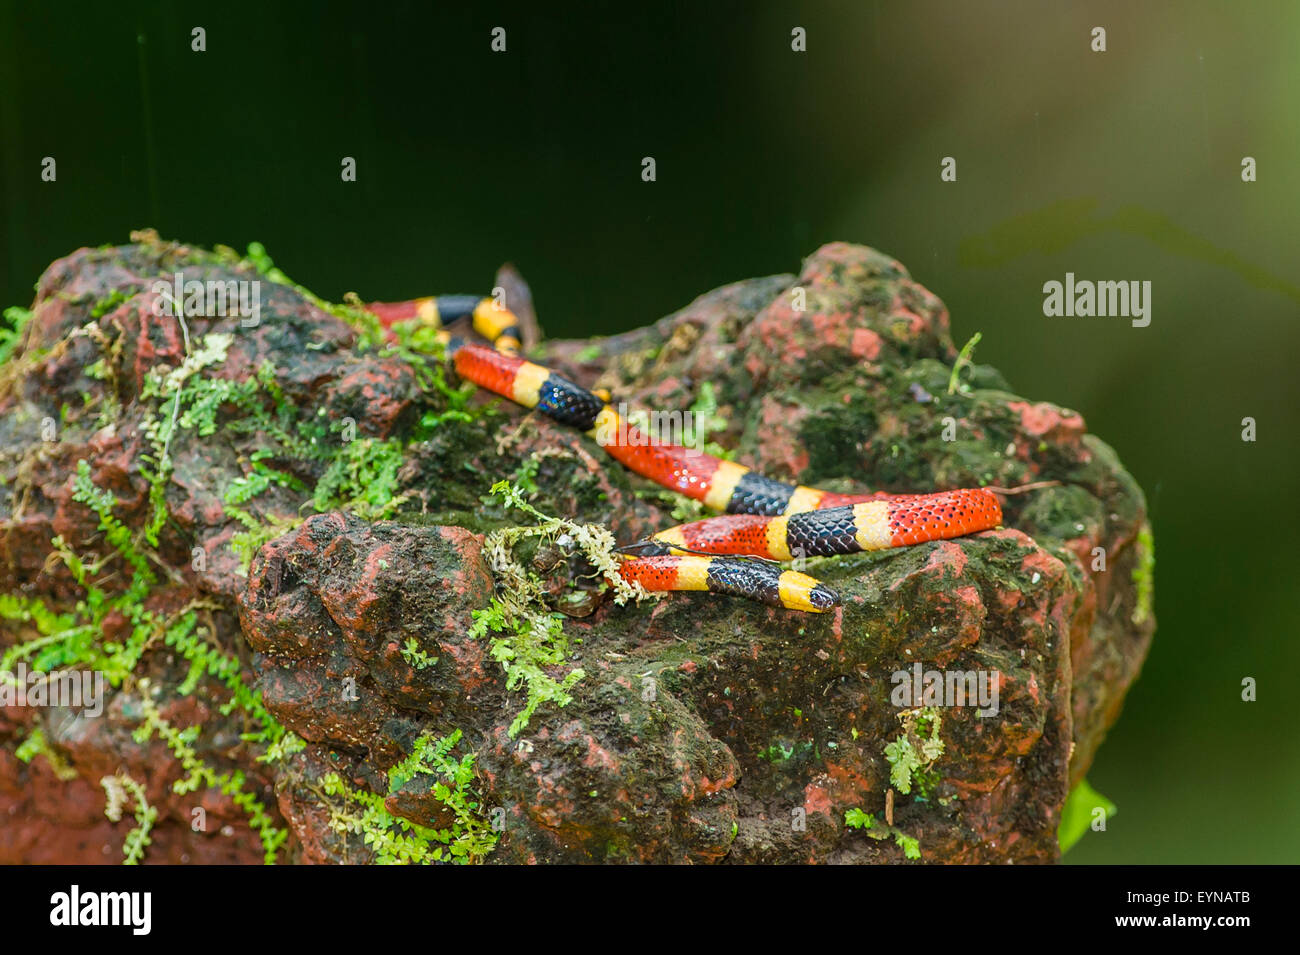 A Central American Coral snake Stock Photo